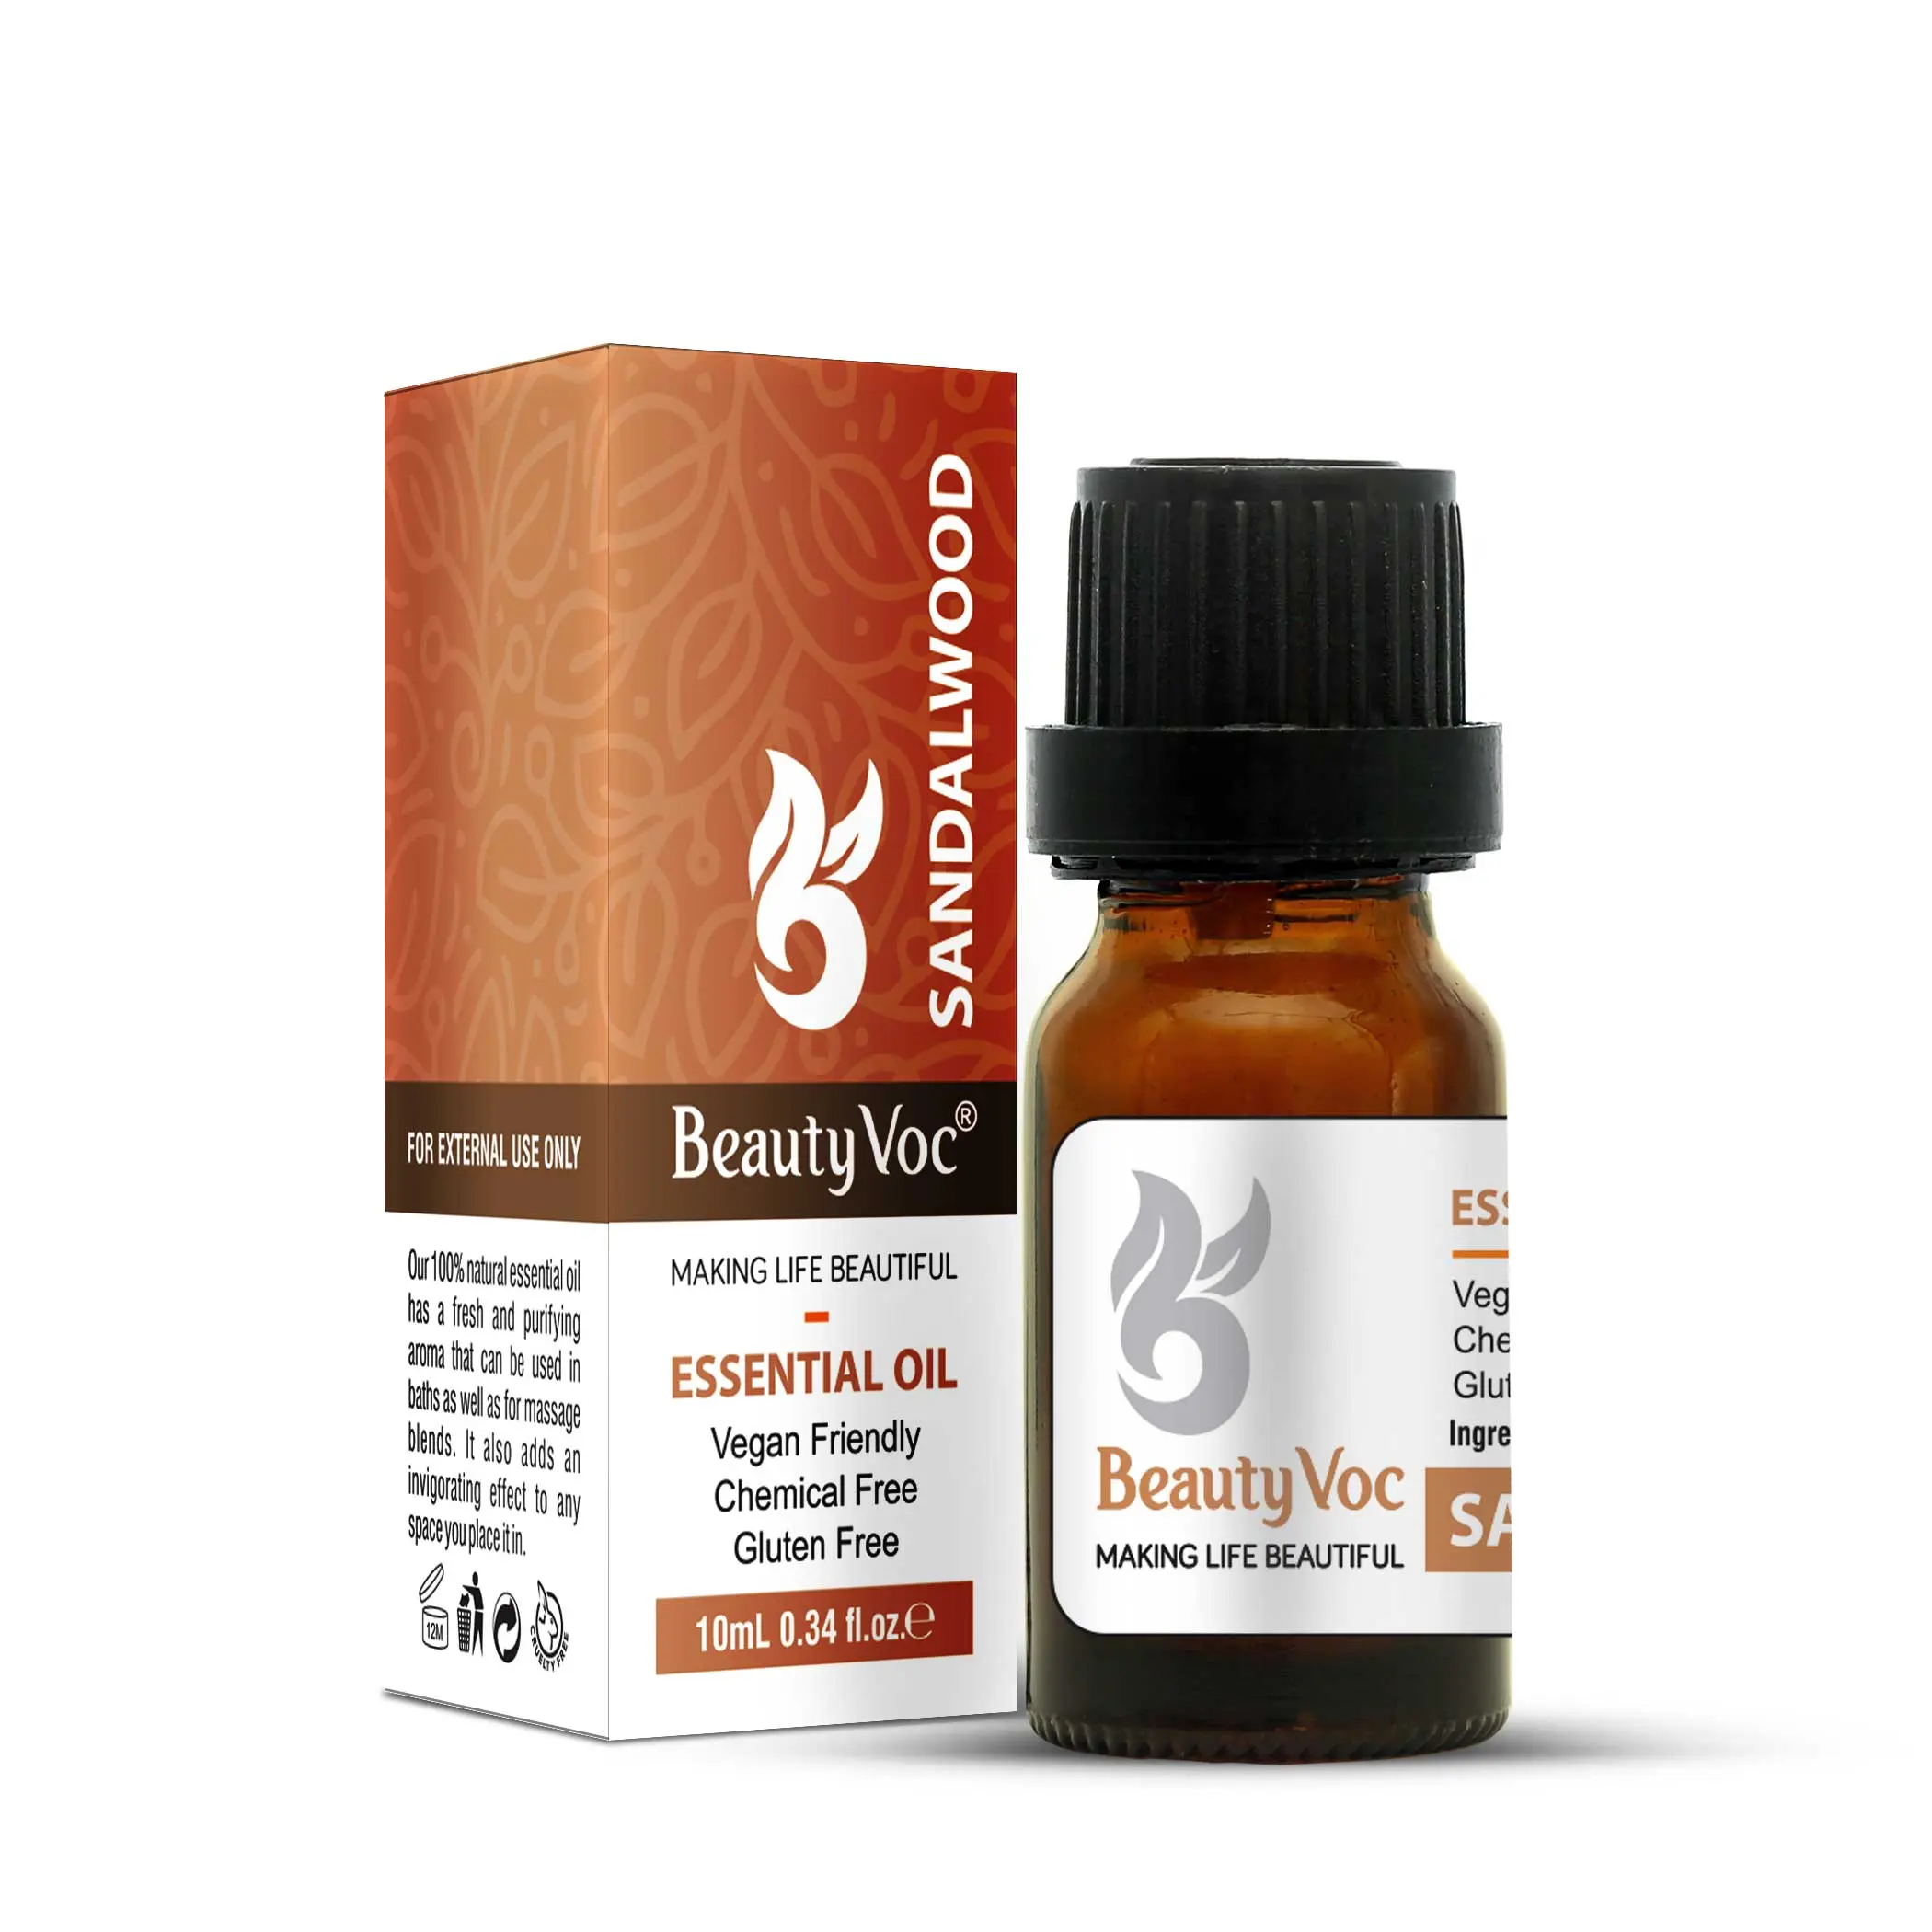 Experience the warm and woody fragrance of Beauty Voc Sandalwood Essential Oil creating a soothing and meditative environment.